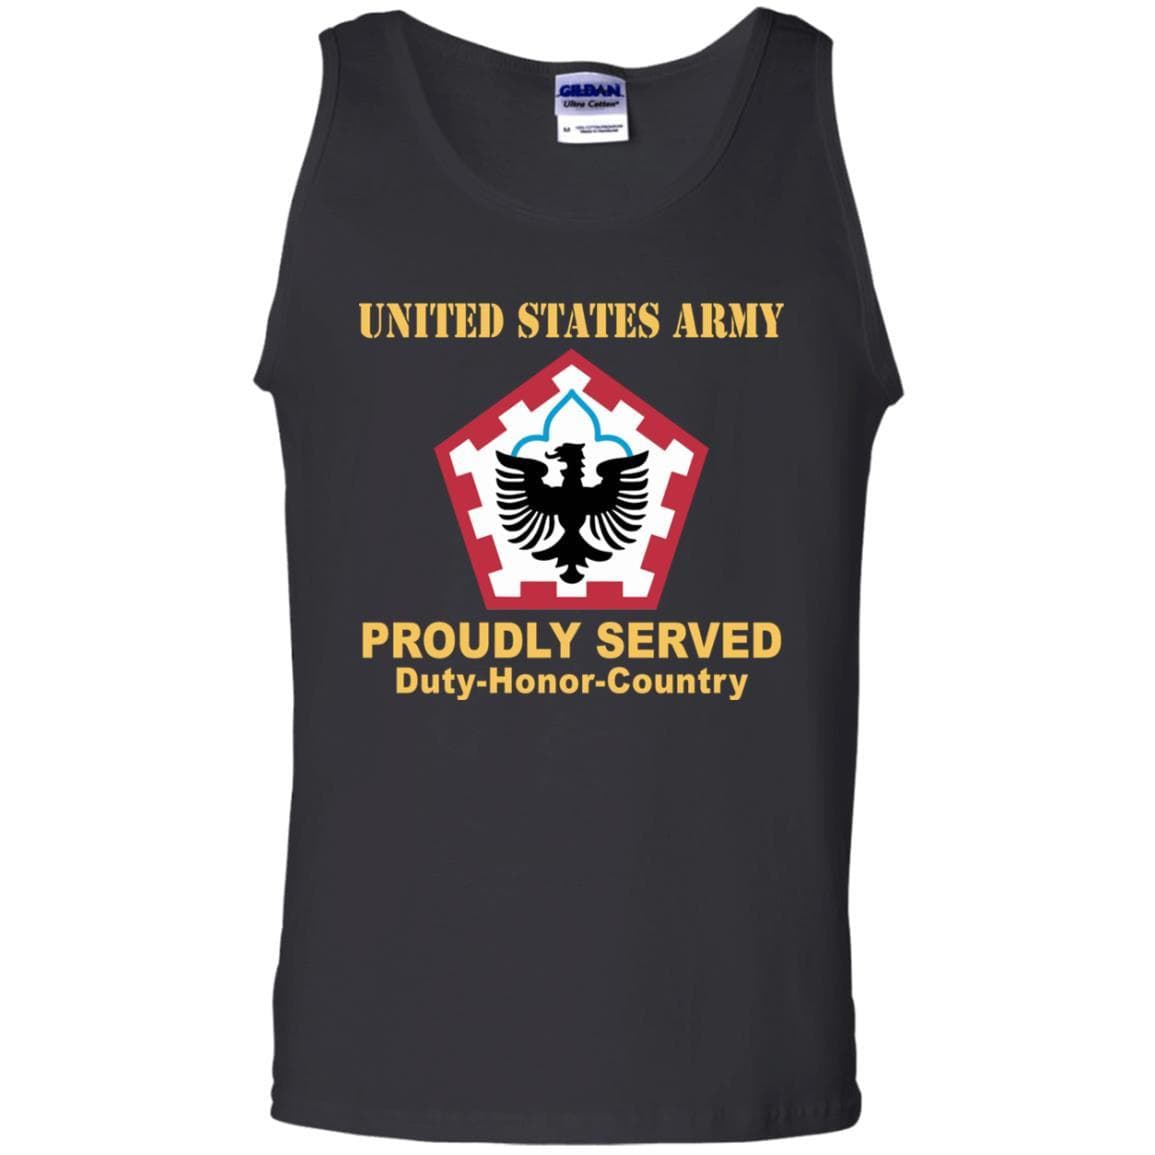 US ARMY 555TH ENGINEER BRIGADE- Proudly Served T-Shirt On Front For Men-TShirt-Army-Veterans Nation